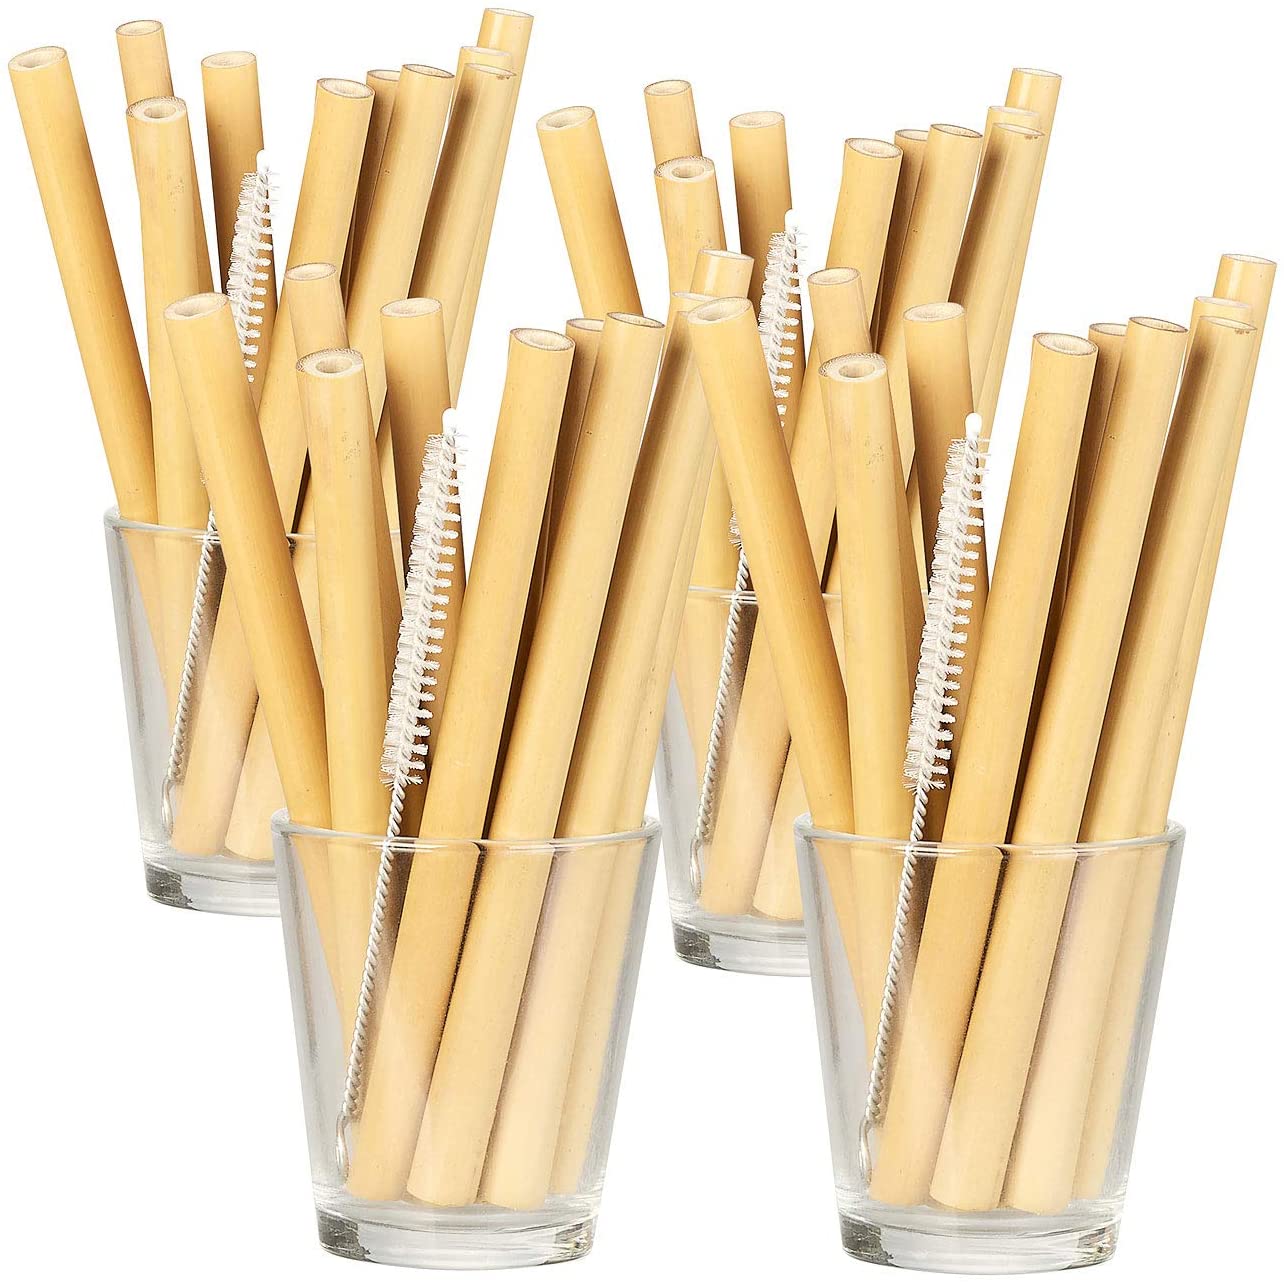 Rosenstein & Söhne Organic Bamboo Drinking Straw:48 Bamboo Straws 130mm Reusable with Cleaning Brush (Natural Straw)